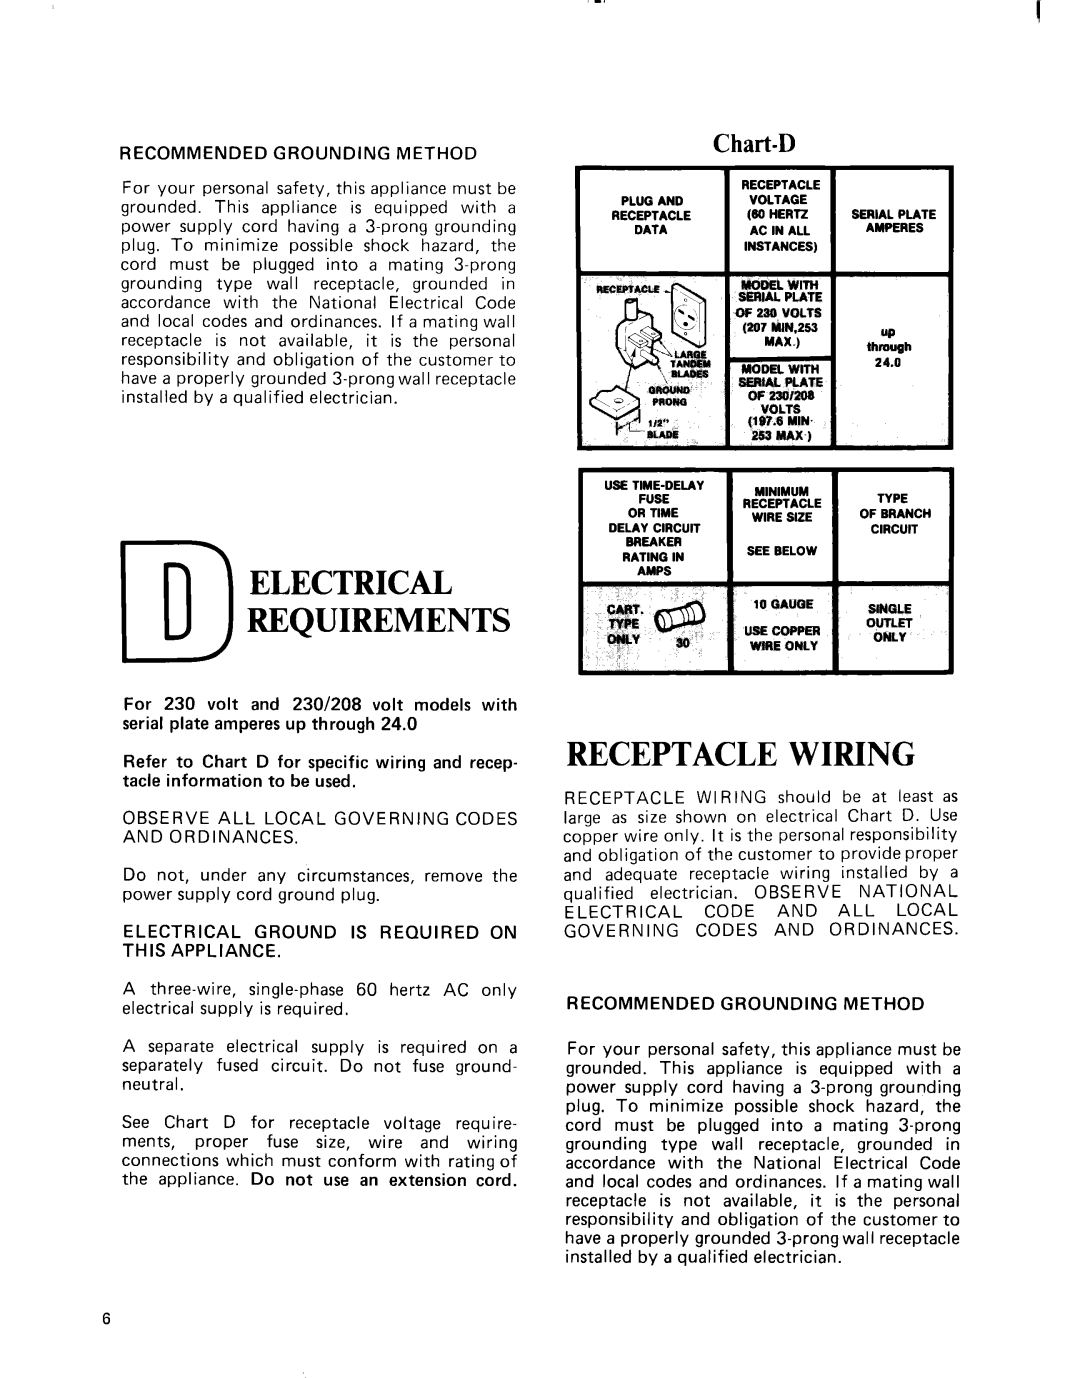 Whirlpool ACE184XM0 manual Electrical Requirements, Chart-D, Receptacle Wiring 